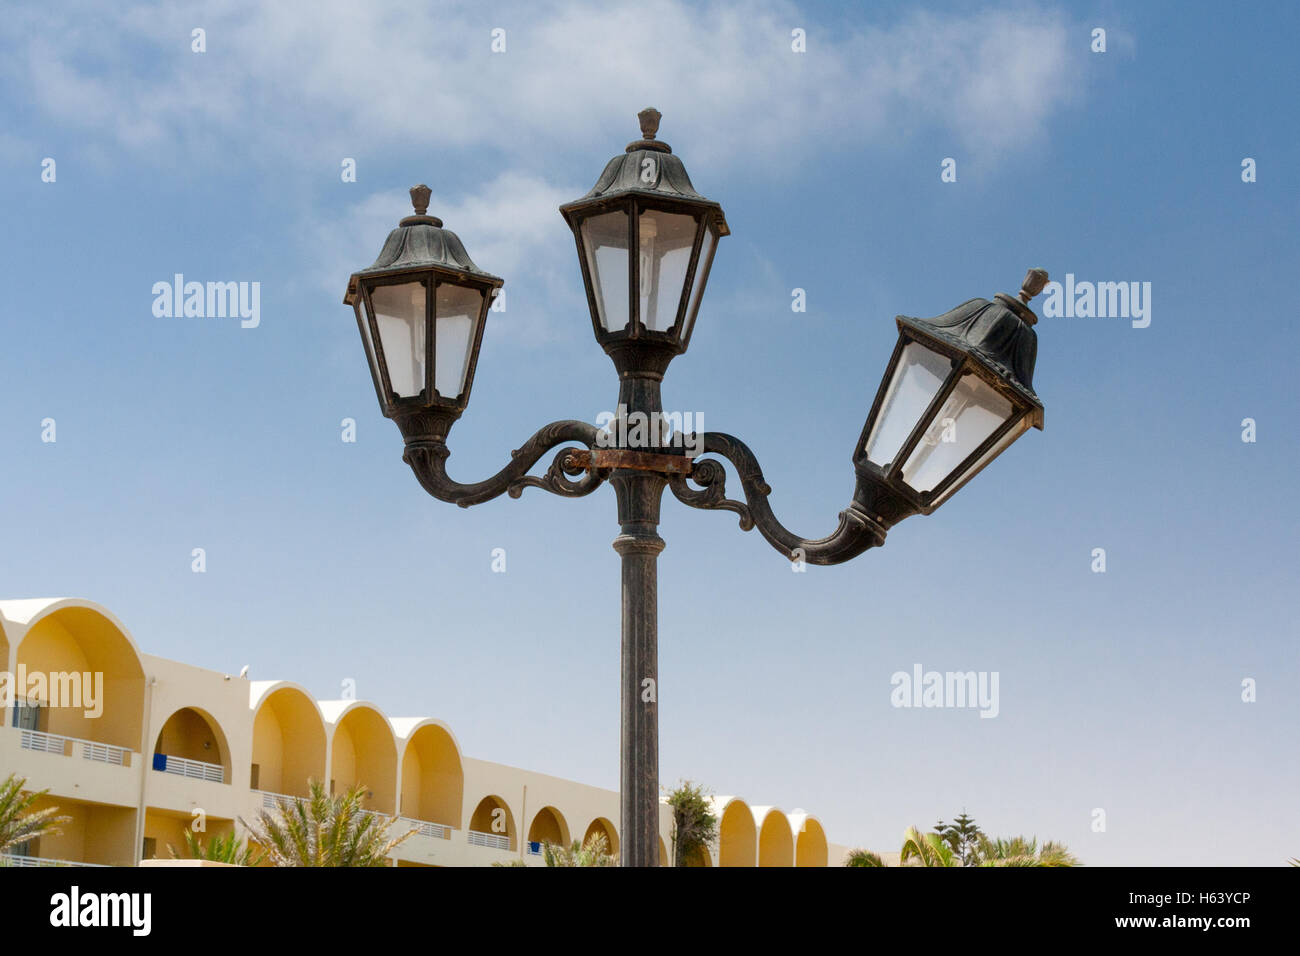 3 lamp lamp post with one lamp bent Stock Photo